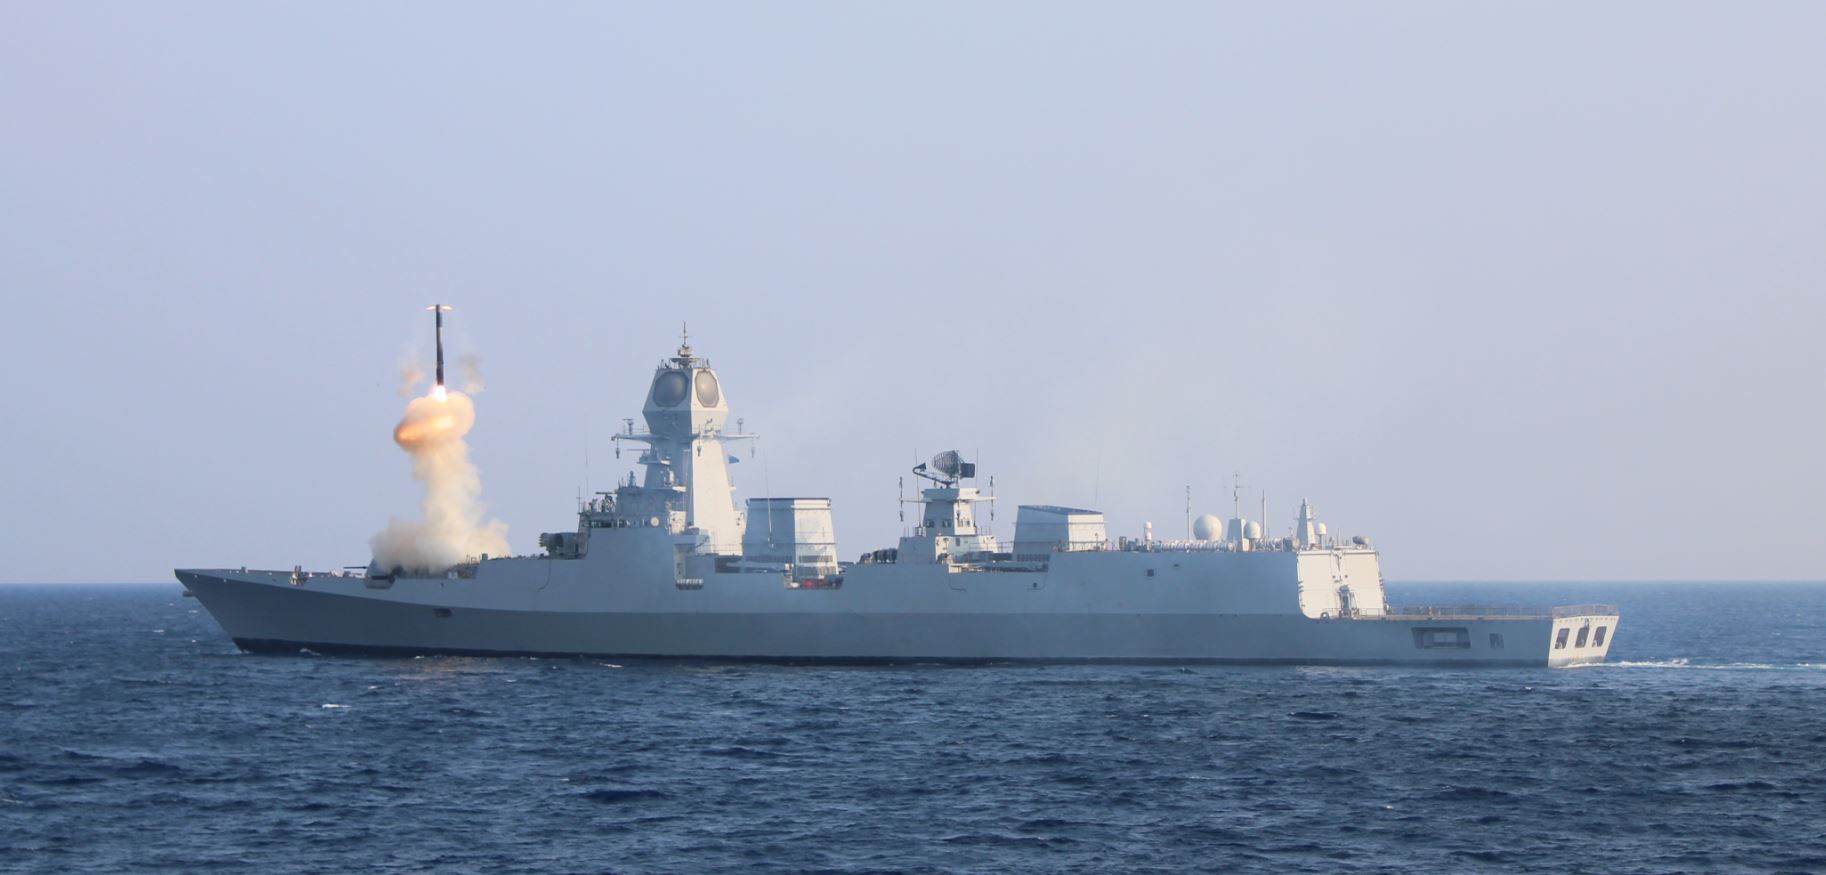 BrahMos cruise missile fired from Indian Navys destroyer Imphal